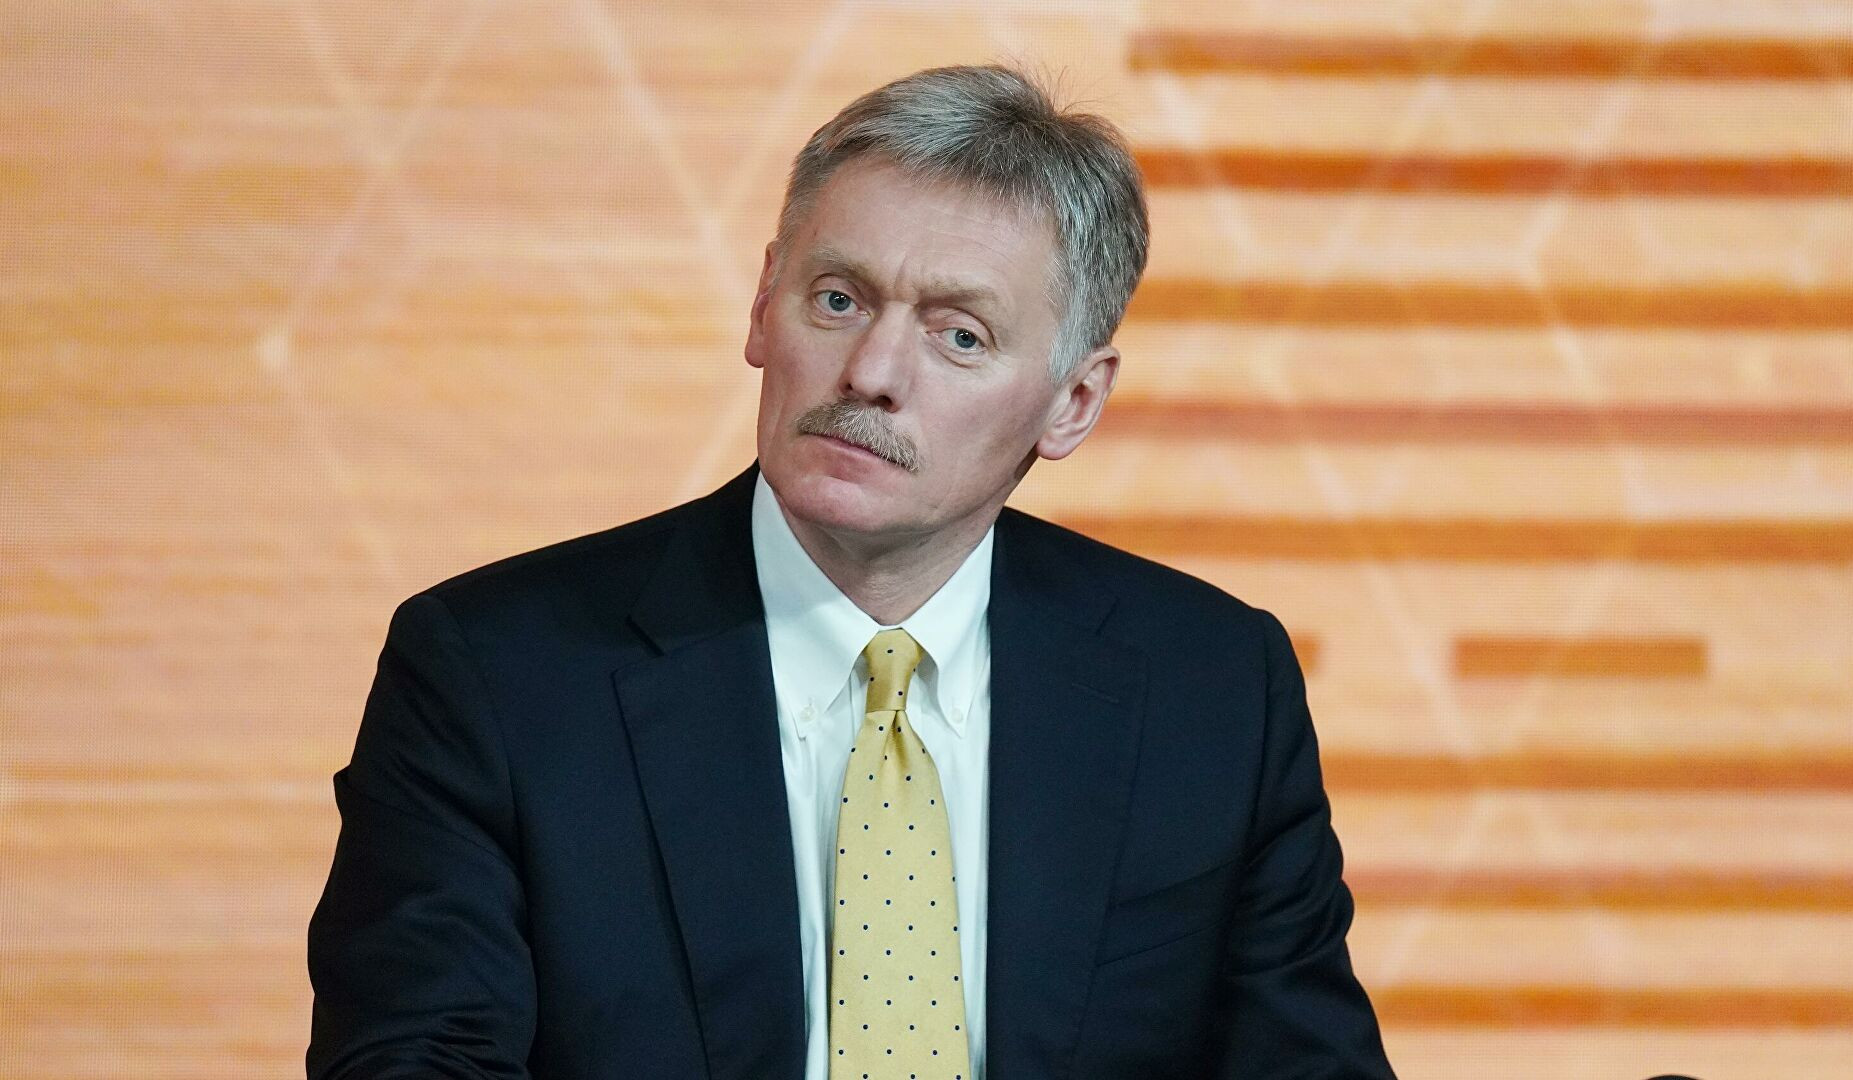 Russia has no intention to interfere in internal US processes: Peskov